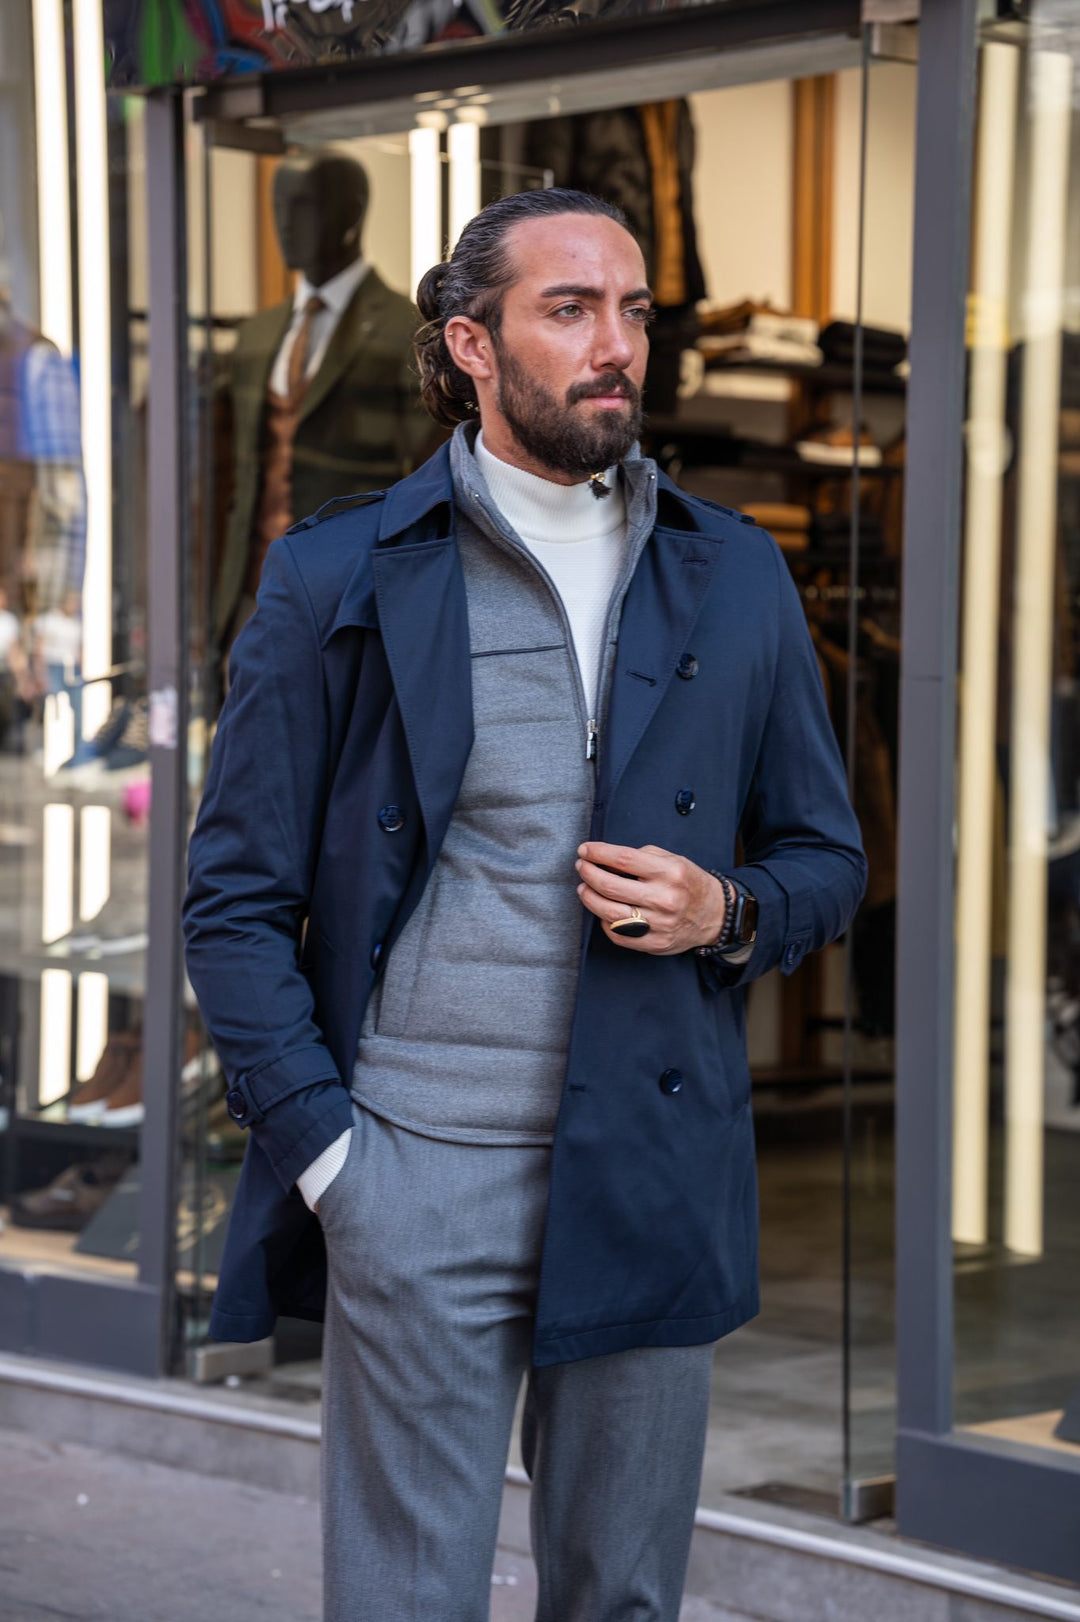 Slim Fit Special Design Wide Collar Trench Coat - Navy Blue